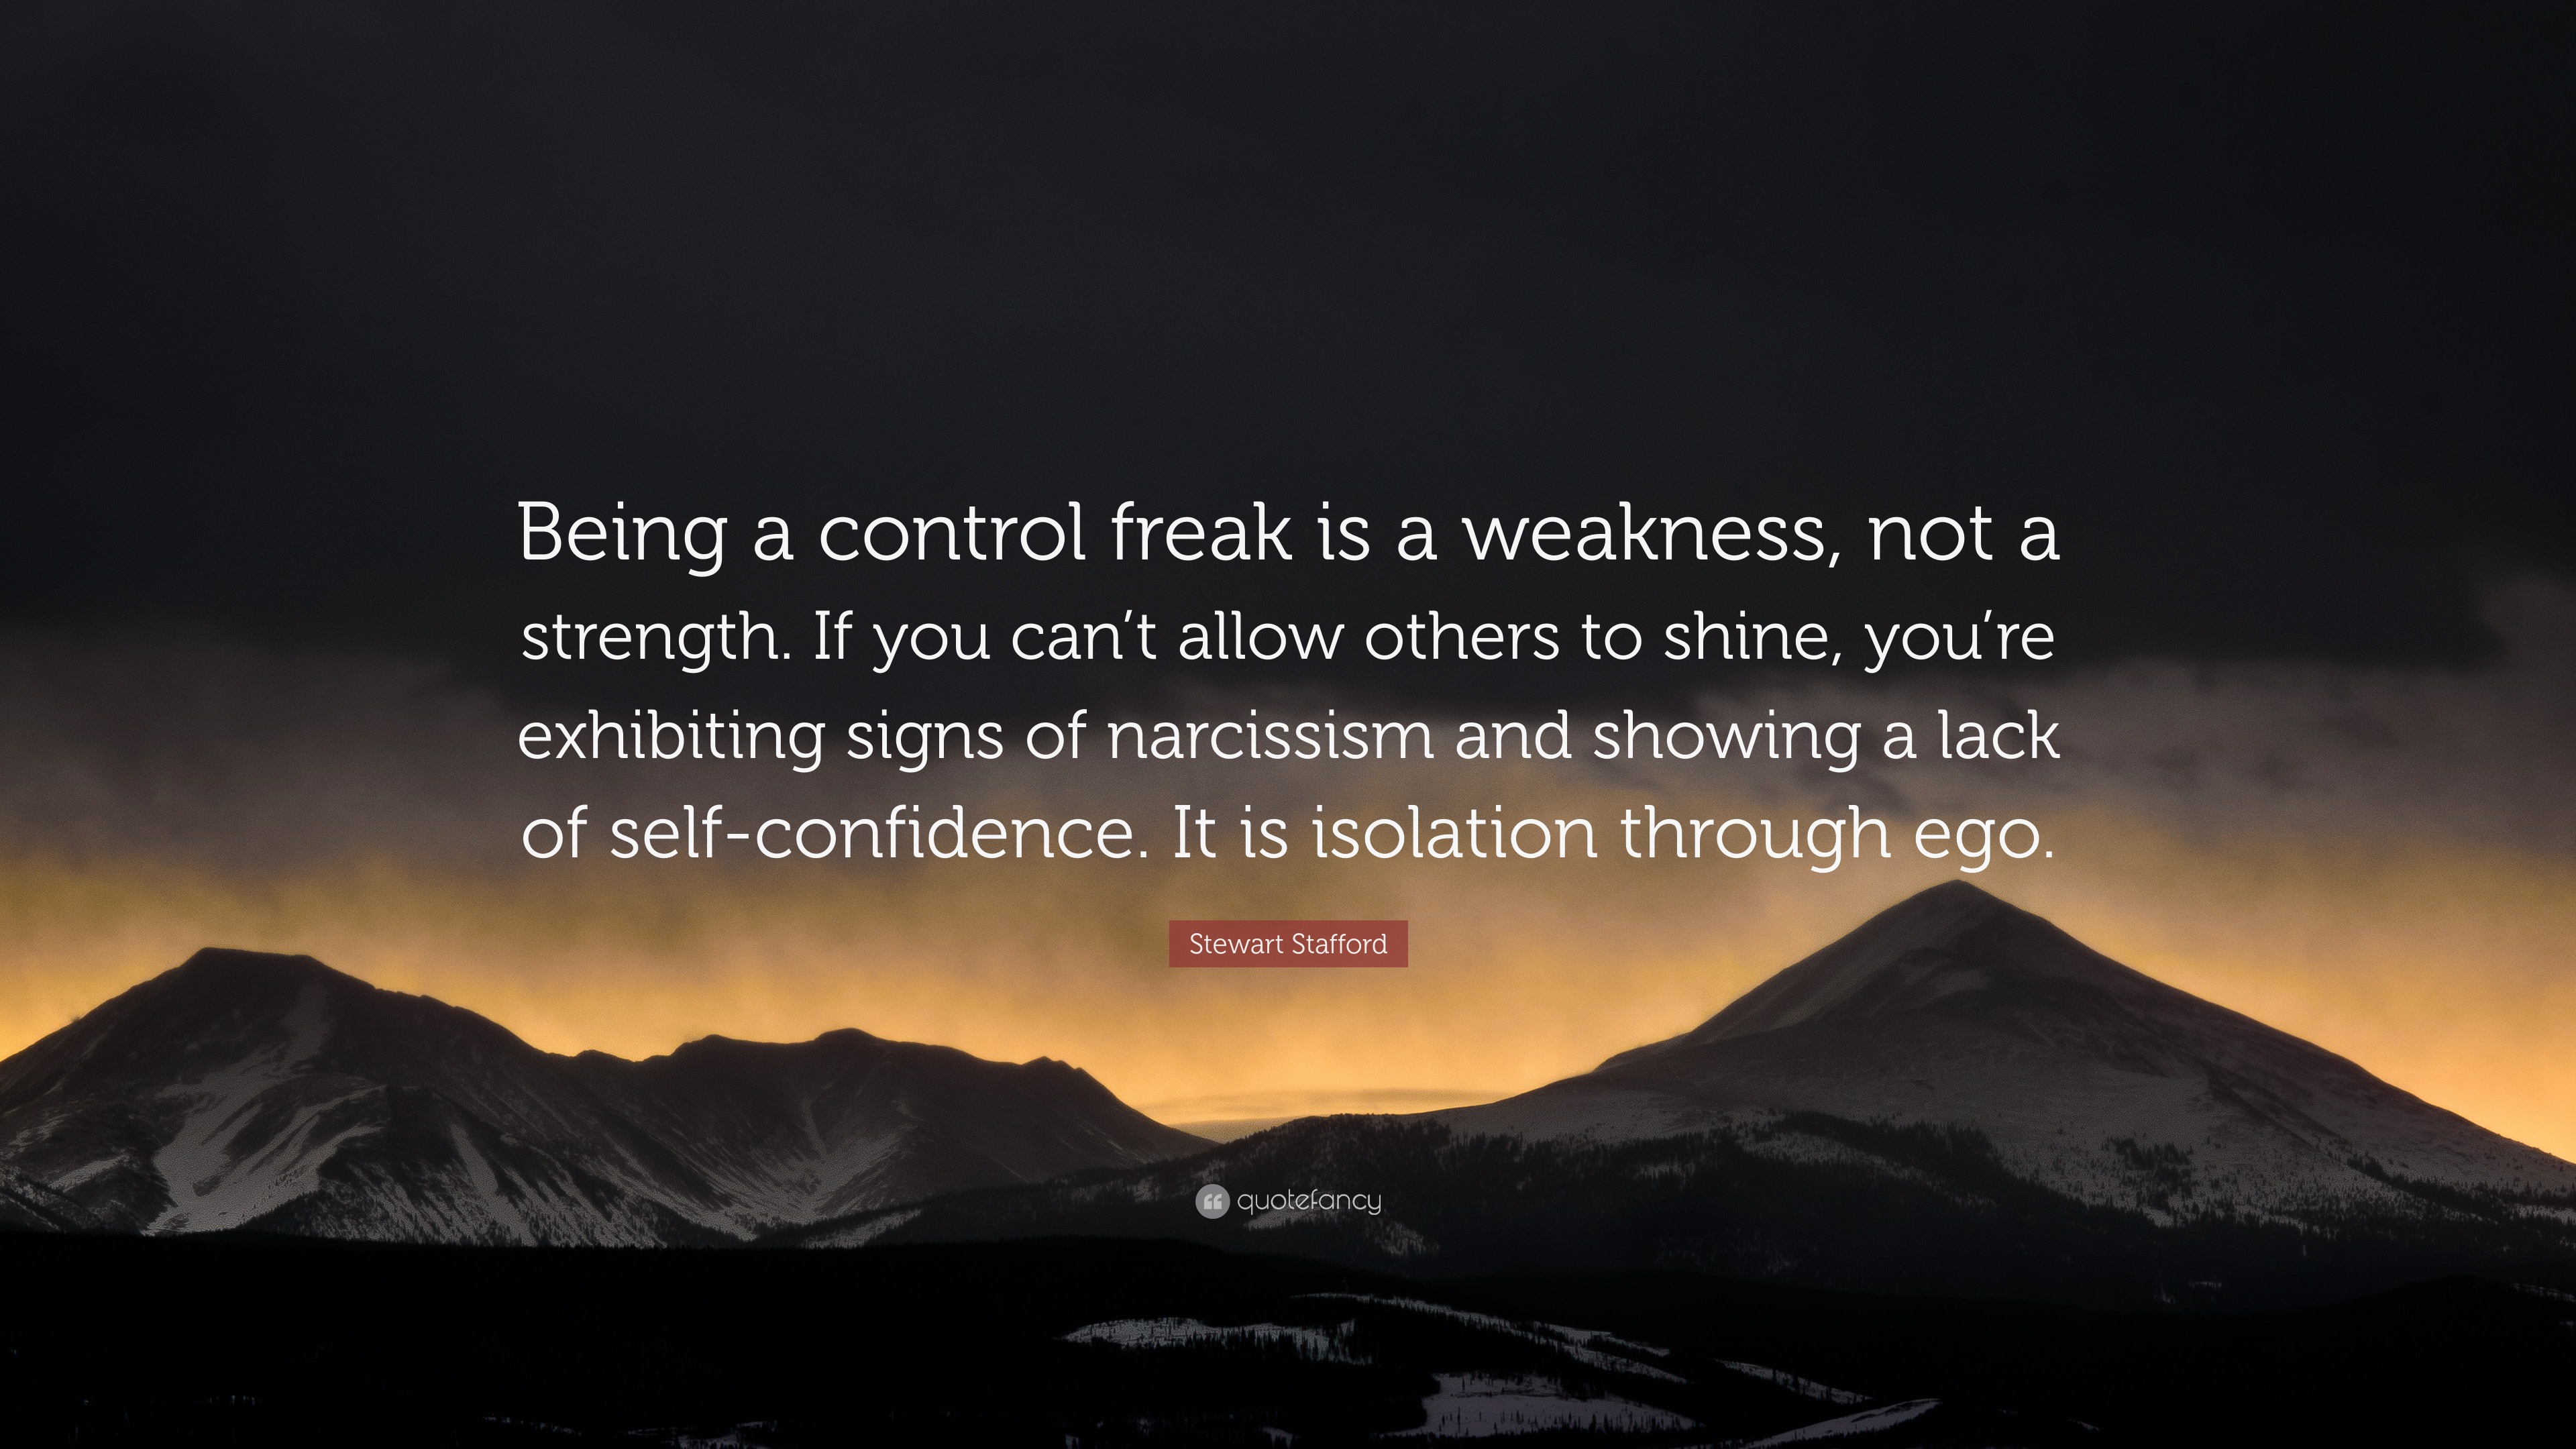 Stewart Stafford Quote: “Being a control freak is a weakness, not